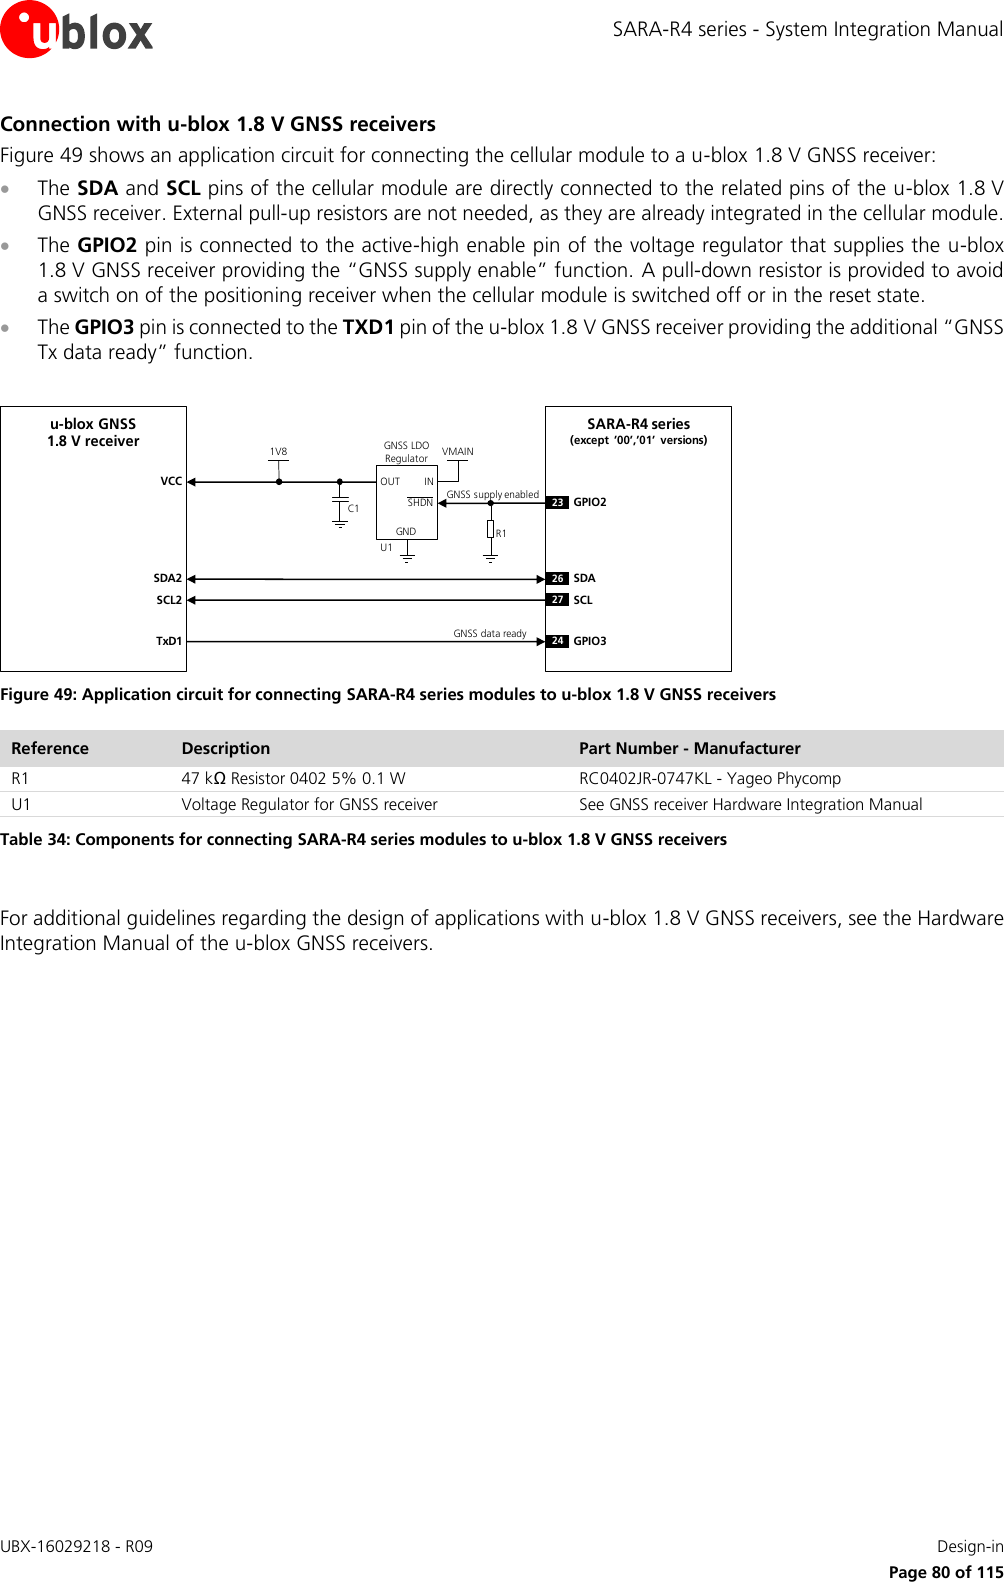 SARA-R4 series - System Integration Manual UBX-16029218 - R09    Design-in     Page 80 of 115 Connection with u-blox 1.8 V GNSS receivers Figure 49 shows an application circuit for connecting the cellular module to a u-blox 1.8 V GNSS receiver:  The SDA and SCL pins of the cellular module are directly connected to the related pins of the u-blox 1.8 V GNSS receiver. External pull-up resistors are not needed, as they are already integrated in the cellular module.  The GPIO2 pin is connected to the active-high enable pin of the voltage regulator that supplies the u-blox 1.8 V GNSS receiver providing the “GNSS supply enable” function. A pull-down resistor is provided to avoid a switch on of the positioning receiver when the cellular module is switched off or in the reset state.  The GPIO3 pin is connected to the TXD1 pin of the u-blox 1.8 V GNSS receiver providing the additional “GNSS Tx data ready” function.  INOUTGNDGNSS LDORegulatorSHDNu-blox GNSS1.8 V receiverSDA2SCL2VMAIN1V8U123 GPIO2SDASCLC12627VCCR1GNSS supply enabledSARA-R4 series(except  ’00’,’01’  versions)TxD1 GPIO324GNSS data ready Figure 49: Application circuit for connecting SARA-R4 series modules to u-blox 1.8 V GNSS receivers Reference Description Part Number - Manufacturer R1 47 kΩ Resistor 0402 5% 0.1 W  RC0402JR-0747KL - Yageo Phycomp U1 Voltage Regulator for GNSS receiver See GNSS receiver Hardware Integration Manual Table 34: Components for connecting SARA-R4 series modules to u-blox 1.8 V GNSS receivers  For additional guidelines regarding the design of applications with u-blox 1.8 V GNSS receivers, see the Hardware Integration Manual of the u-blox GNSS receivers.  